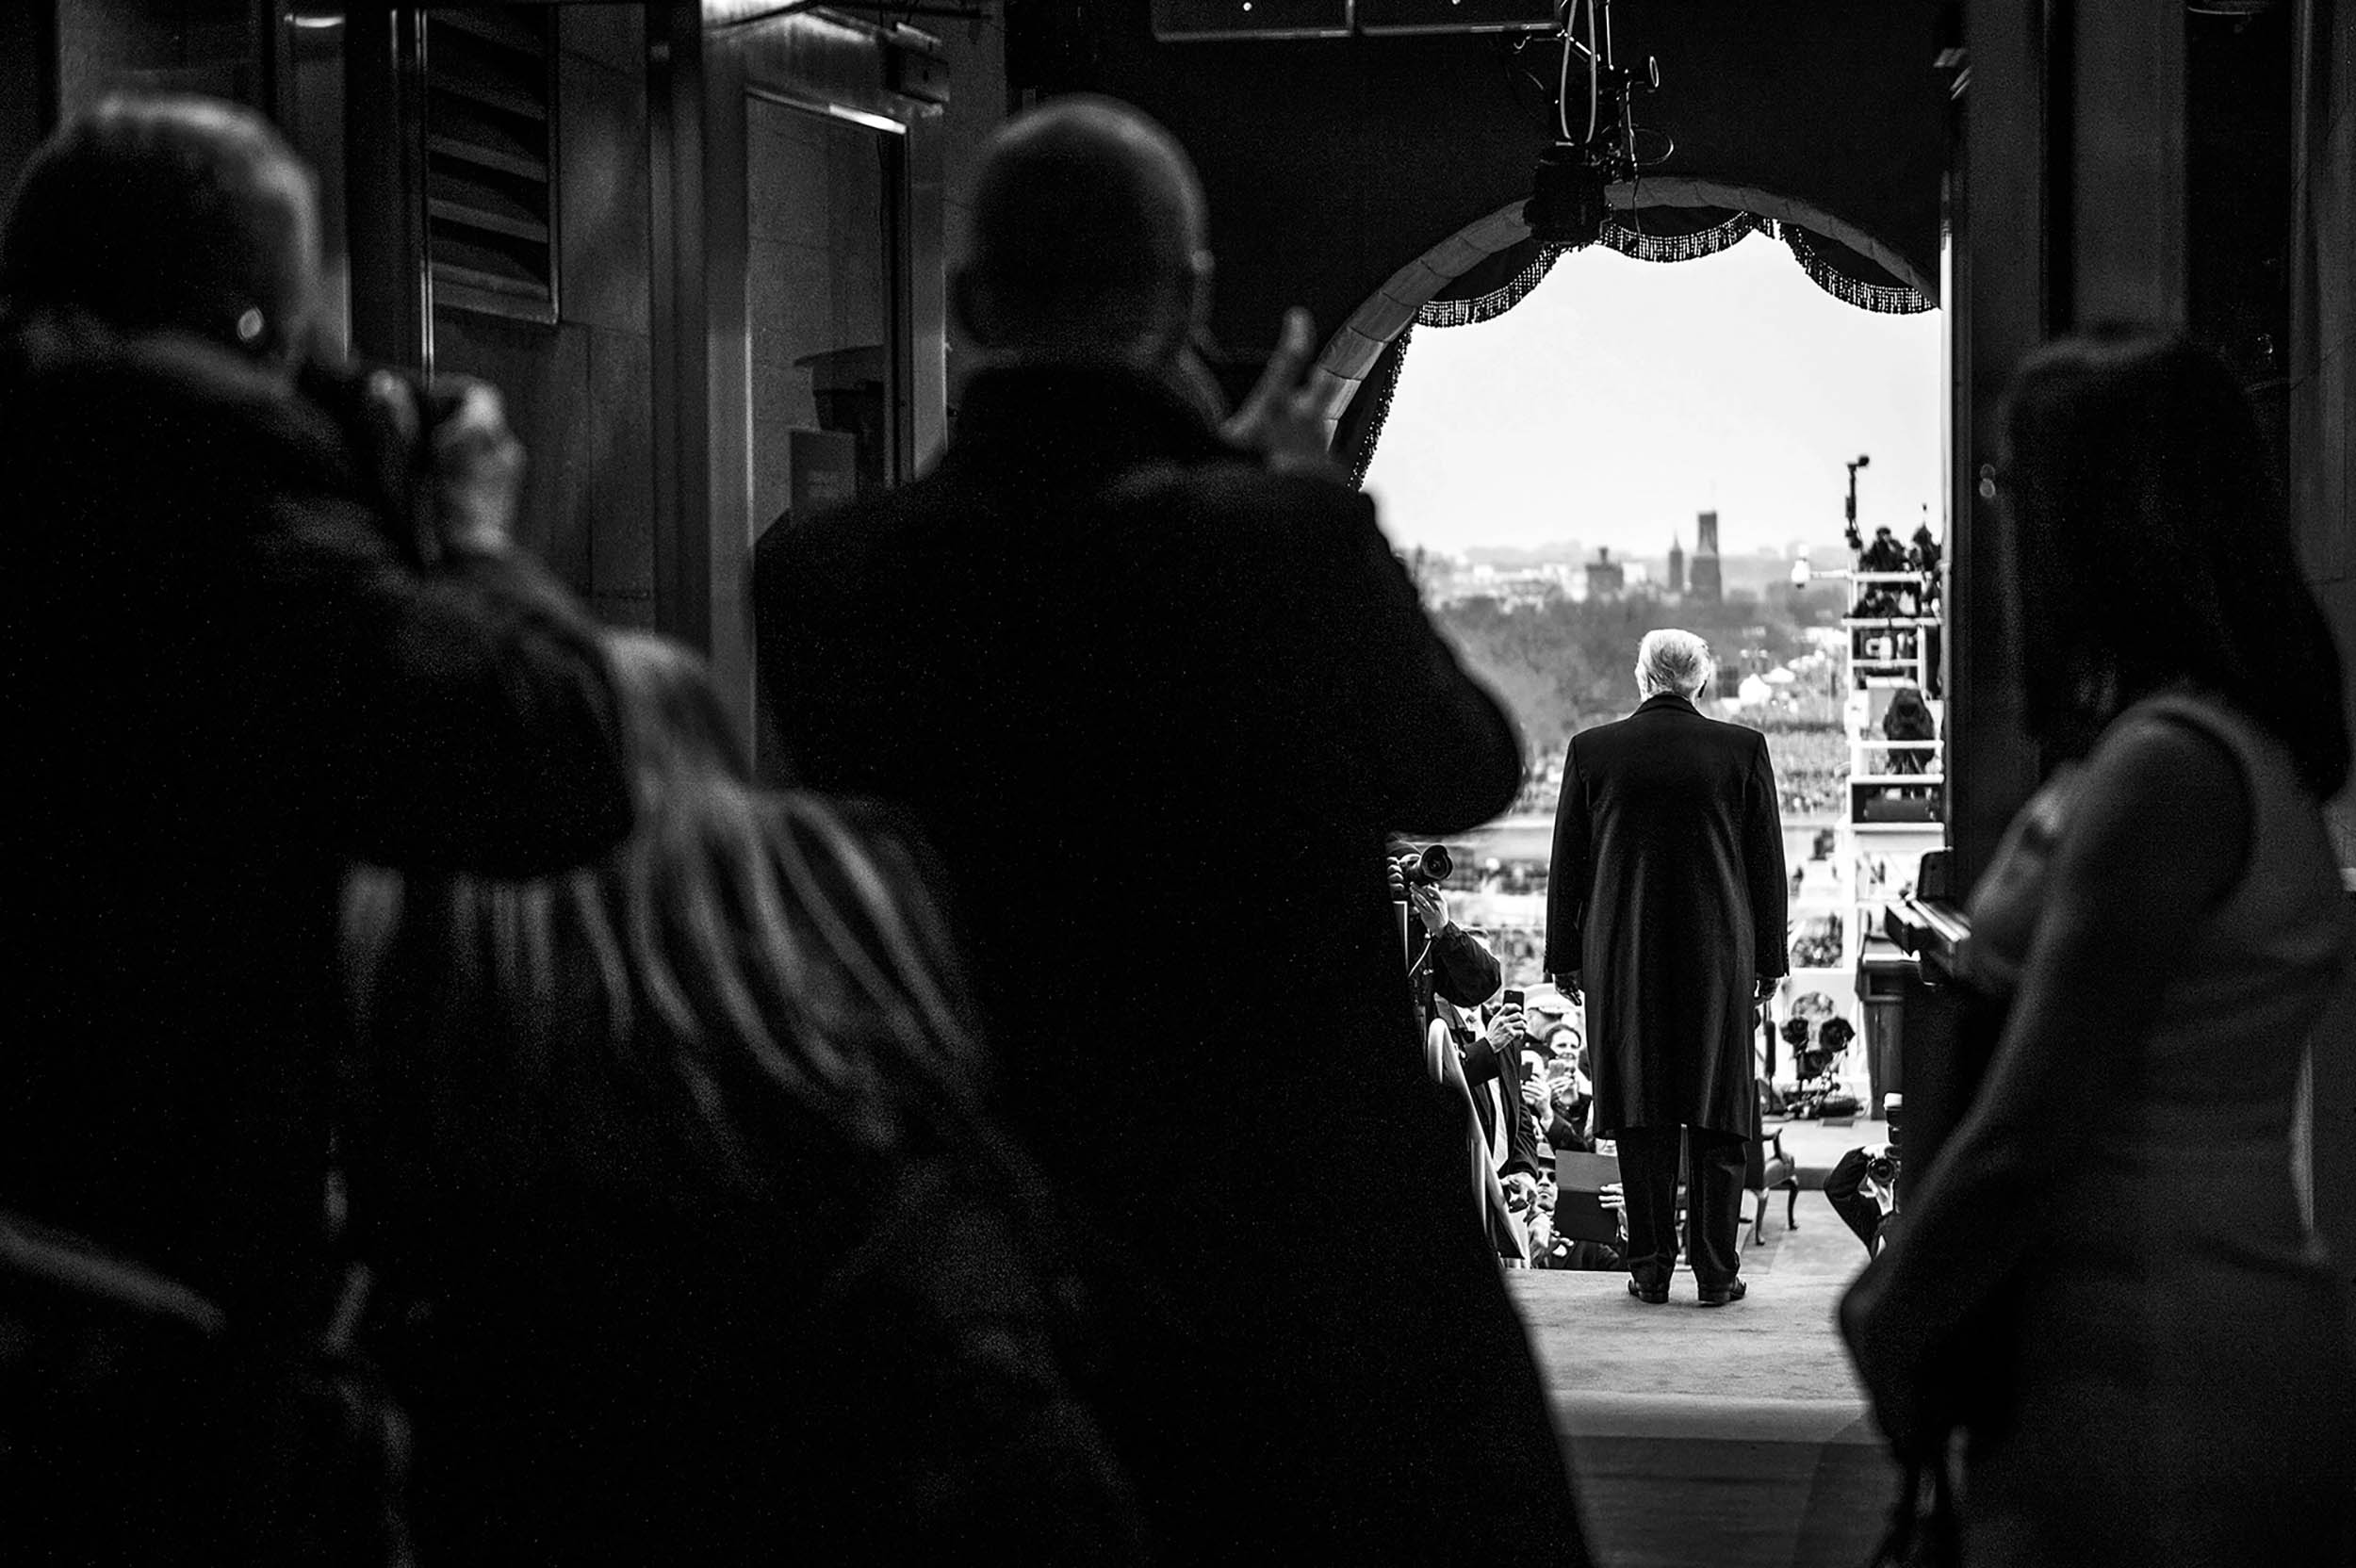 President-elect Donald J. Trump stands on platform of Capitol during 58th Presidential Inauguration in Washington, DC